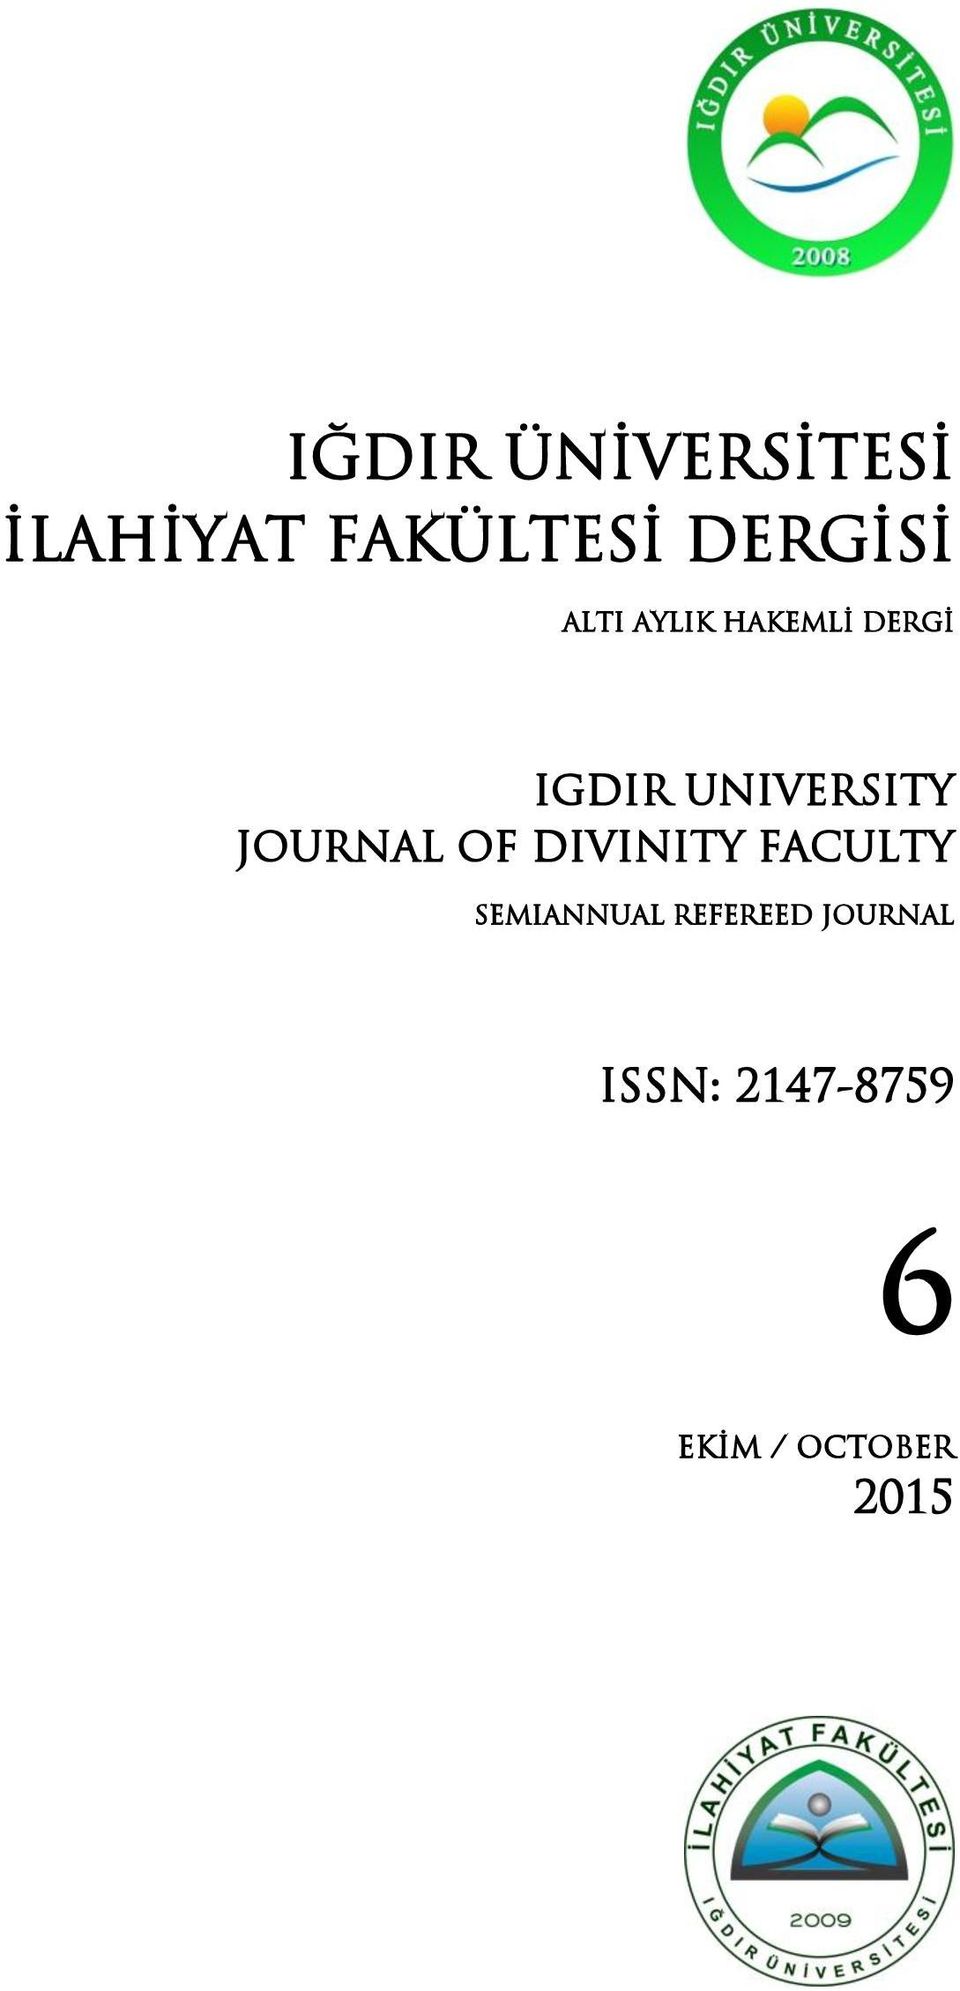 UNIVERSITY JOURNAL OF DIVINITY FACULTY